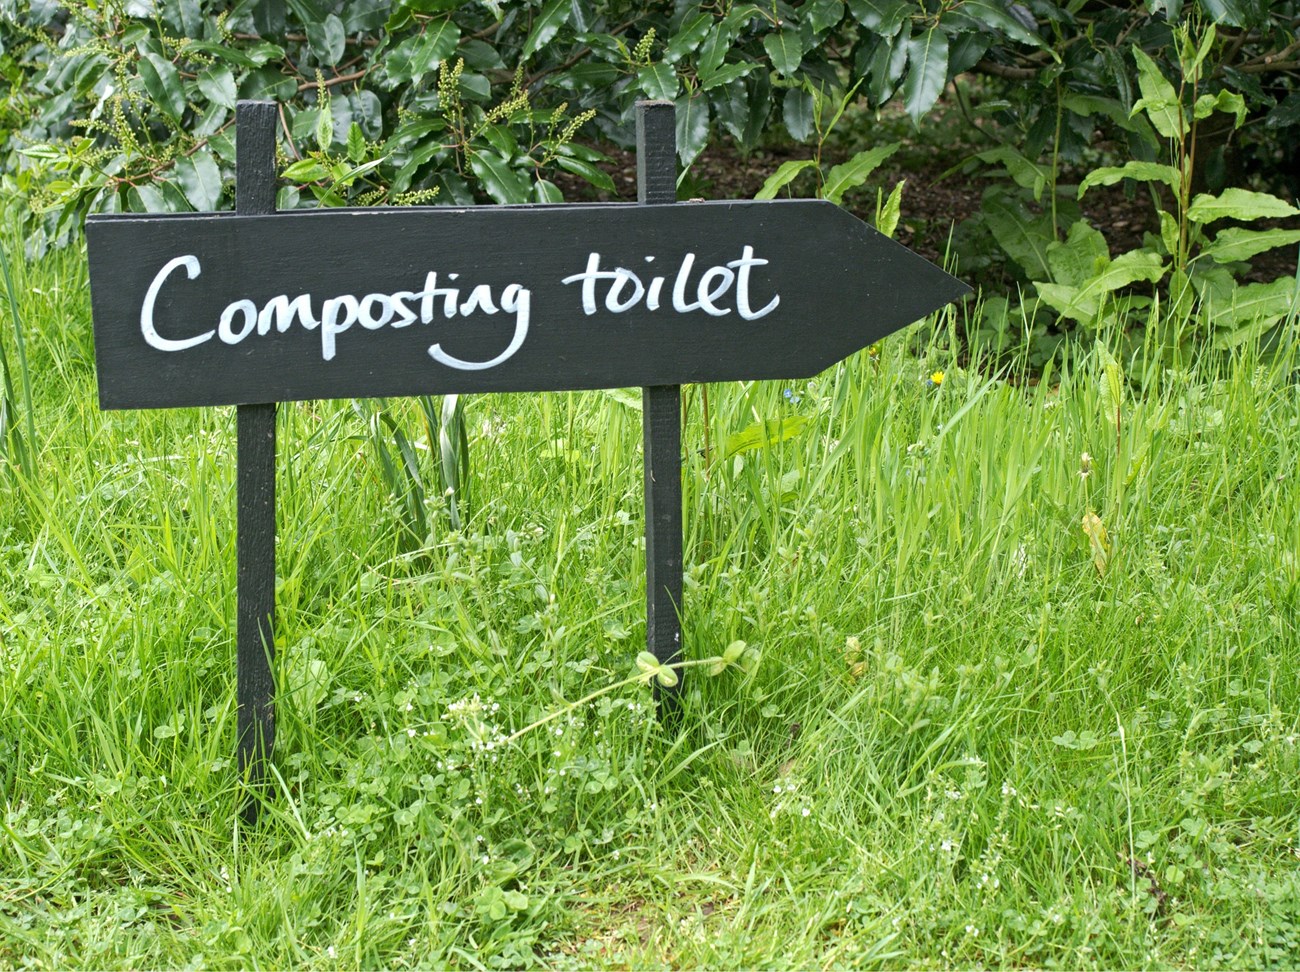 composting toilets wooden sign